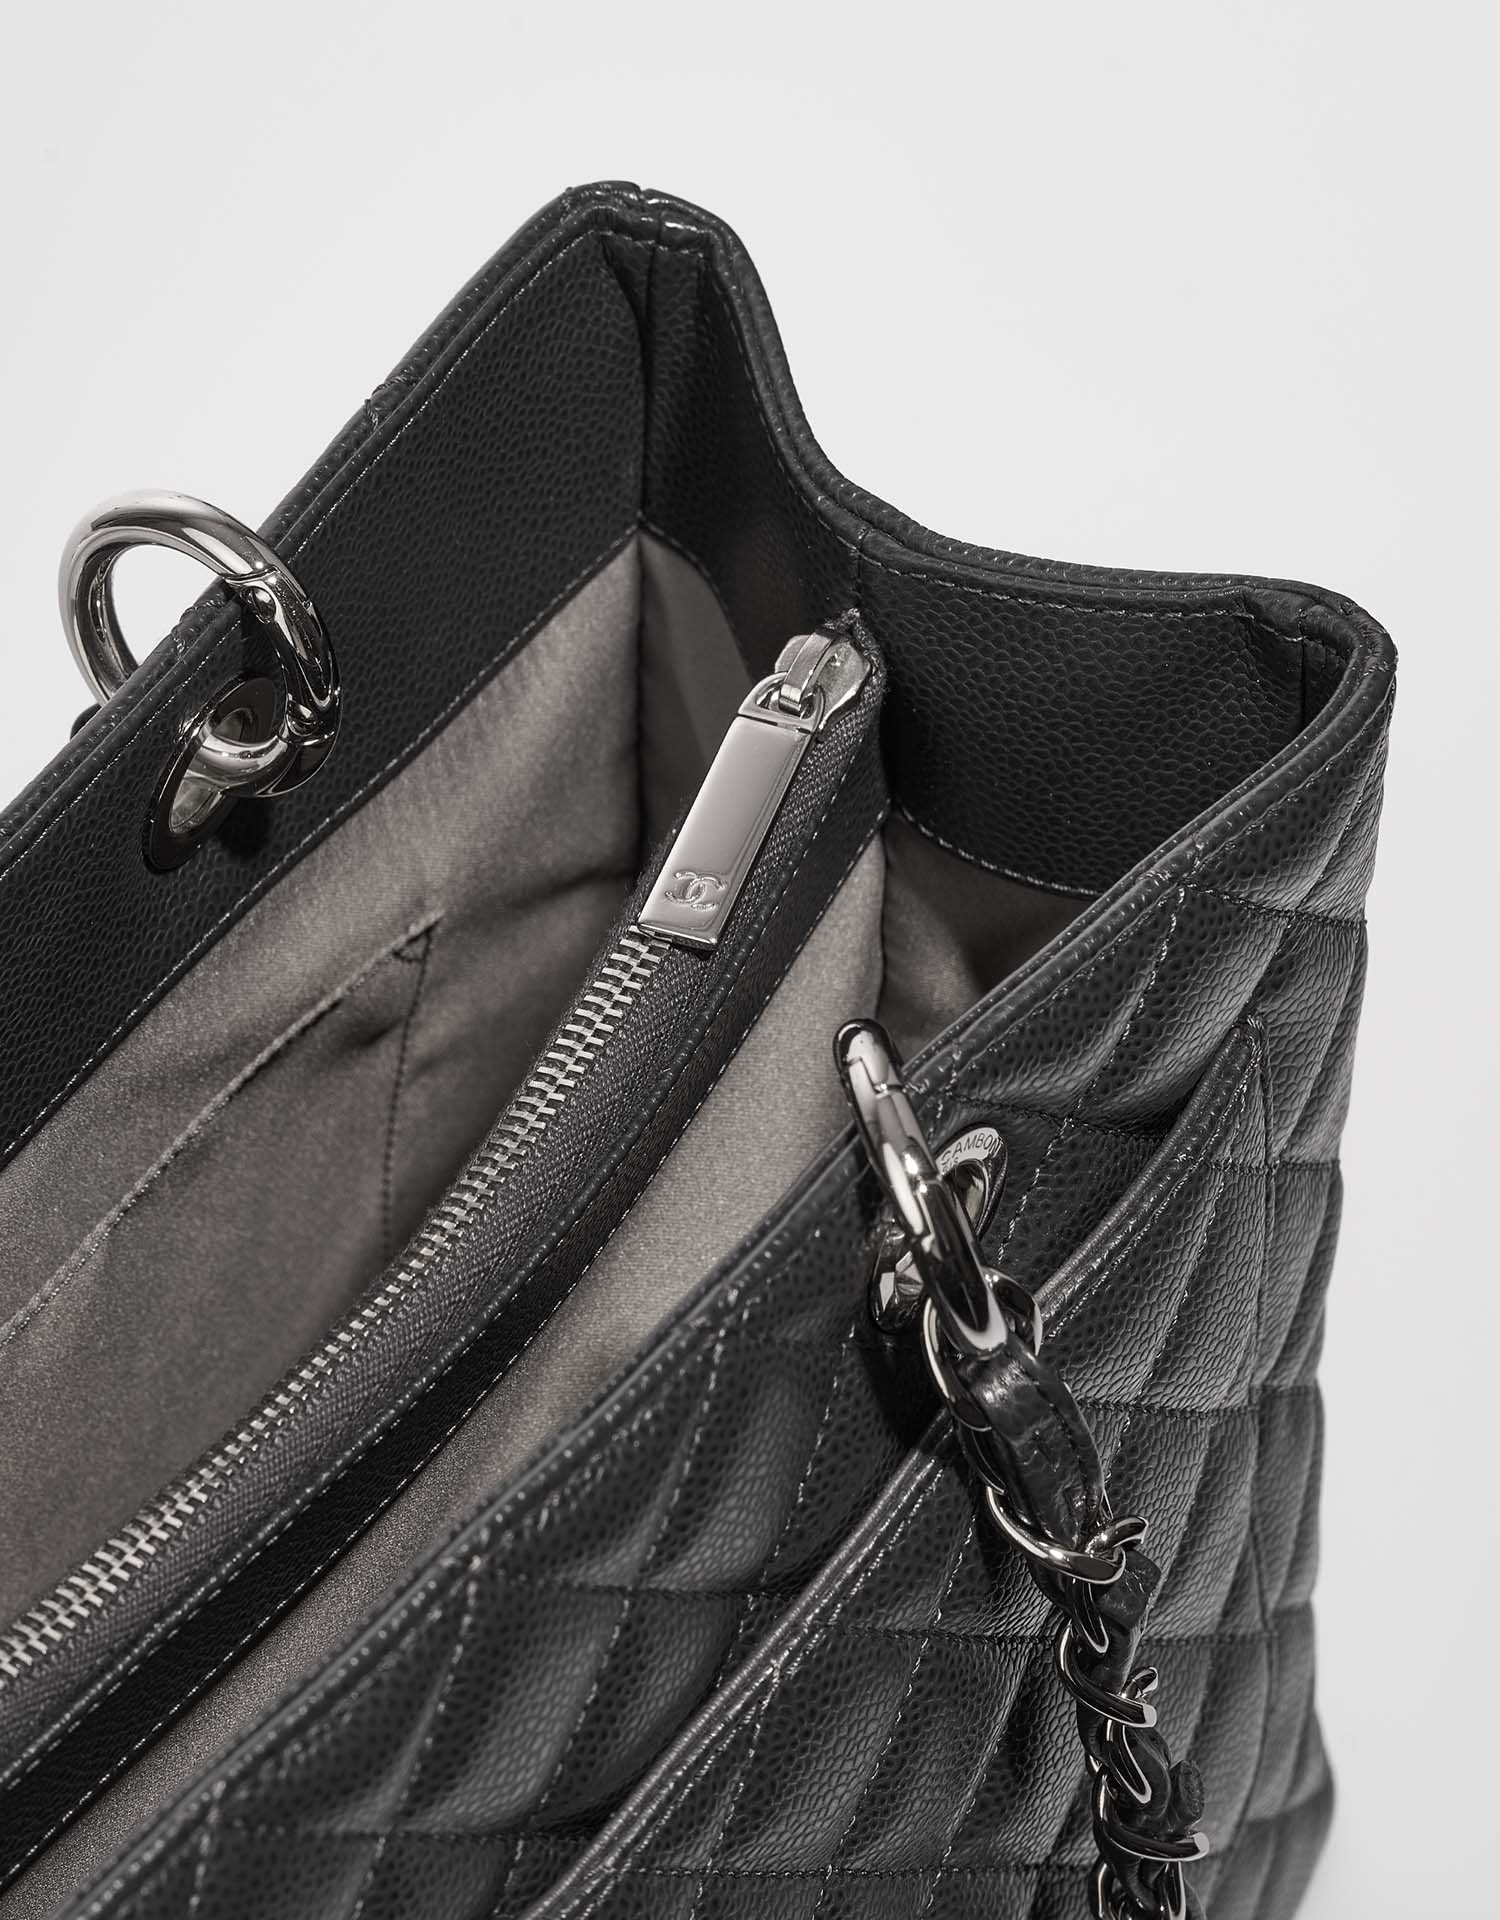 Chanel GST Charcoal Closing System  | Sell your designer bag on Saclab.com